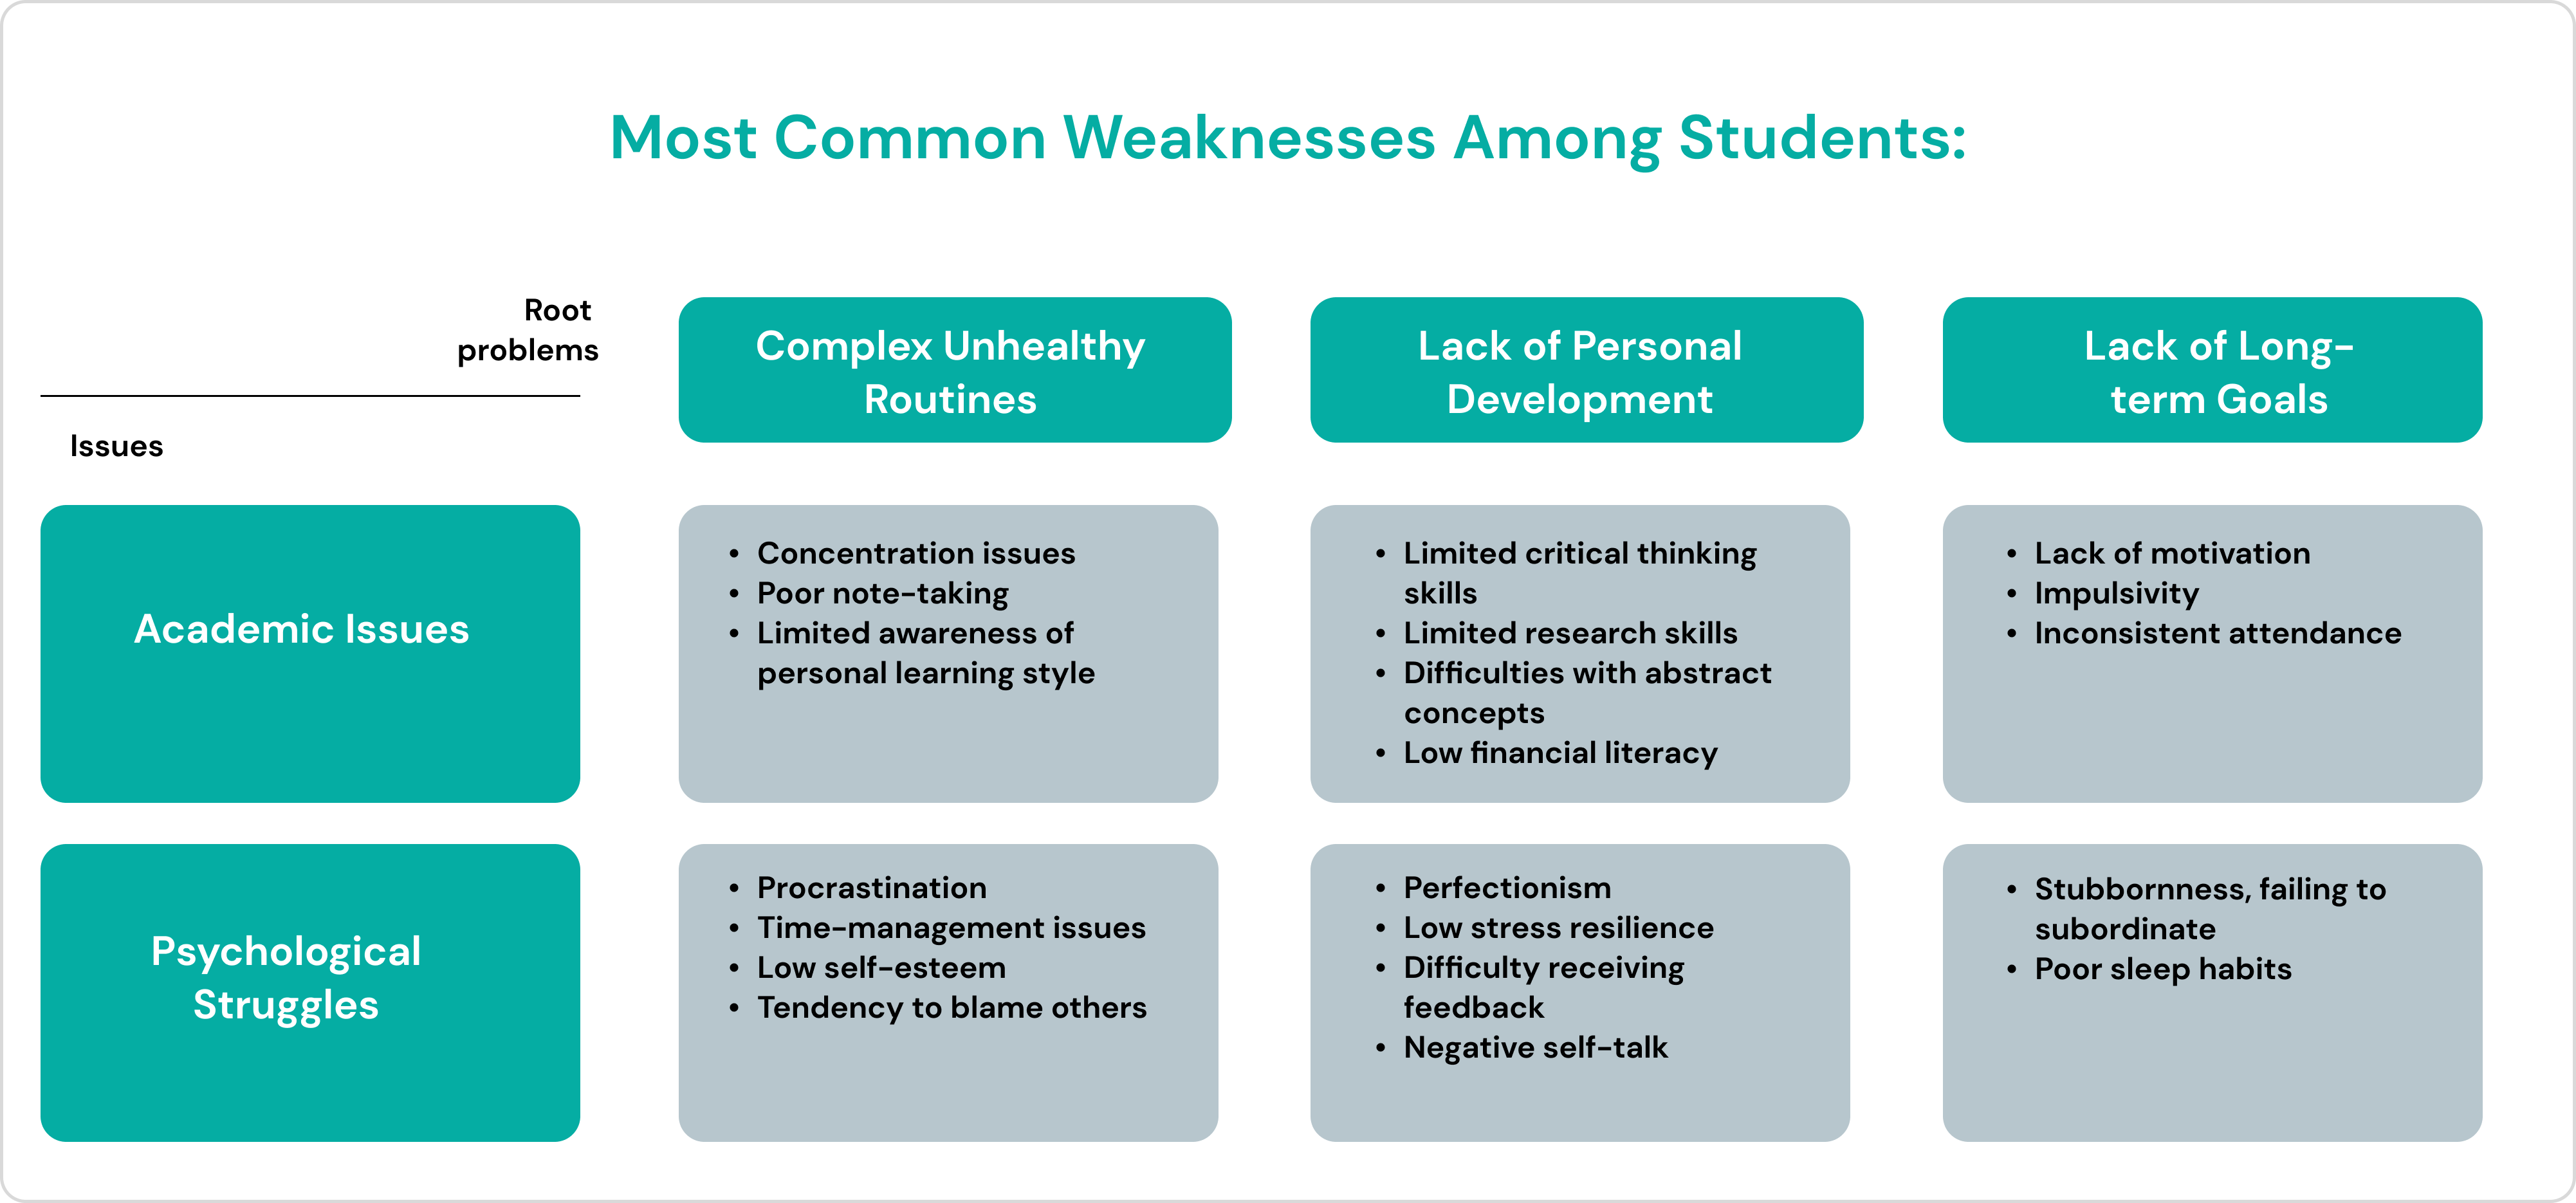 Most Common Weaknesses as a student